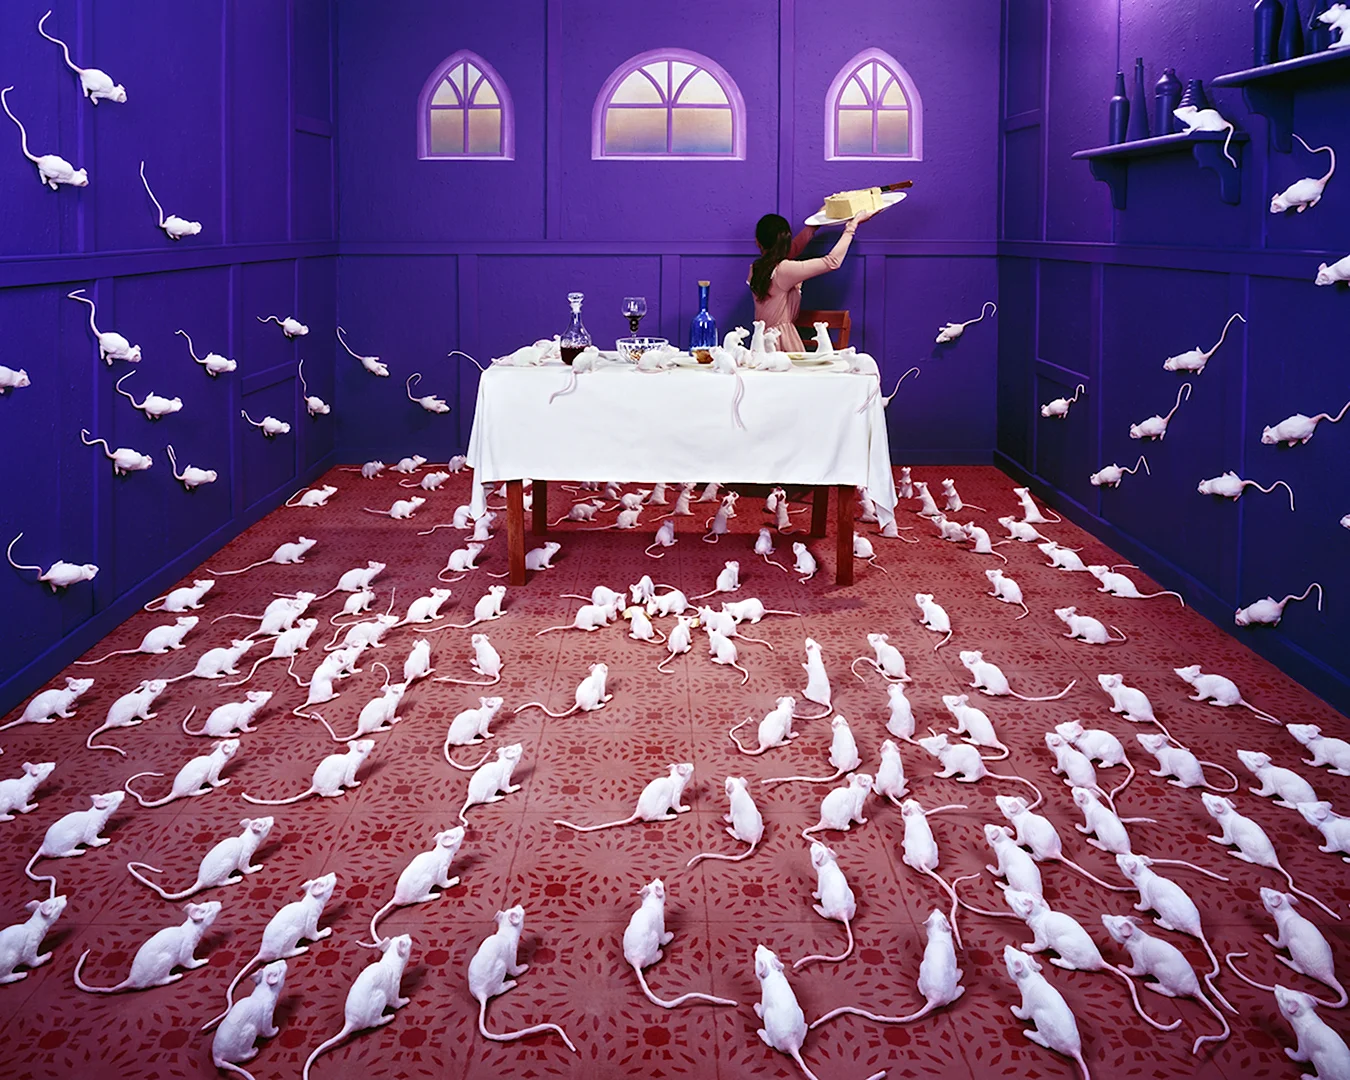 Jee young Lee